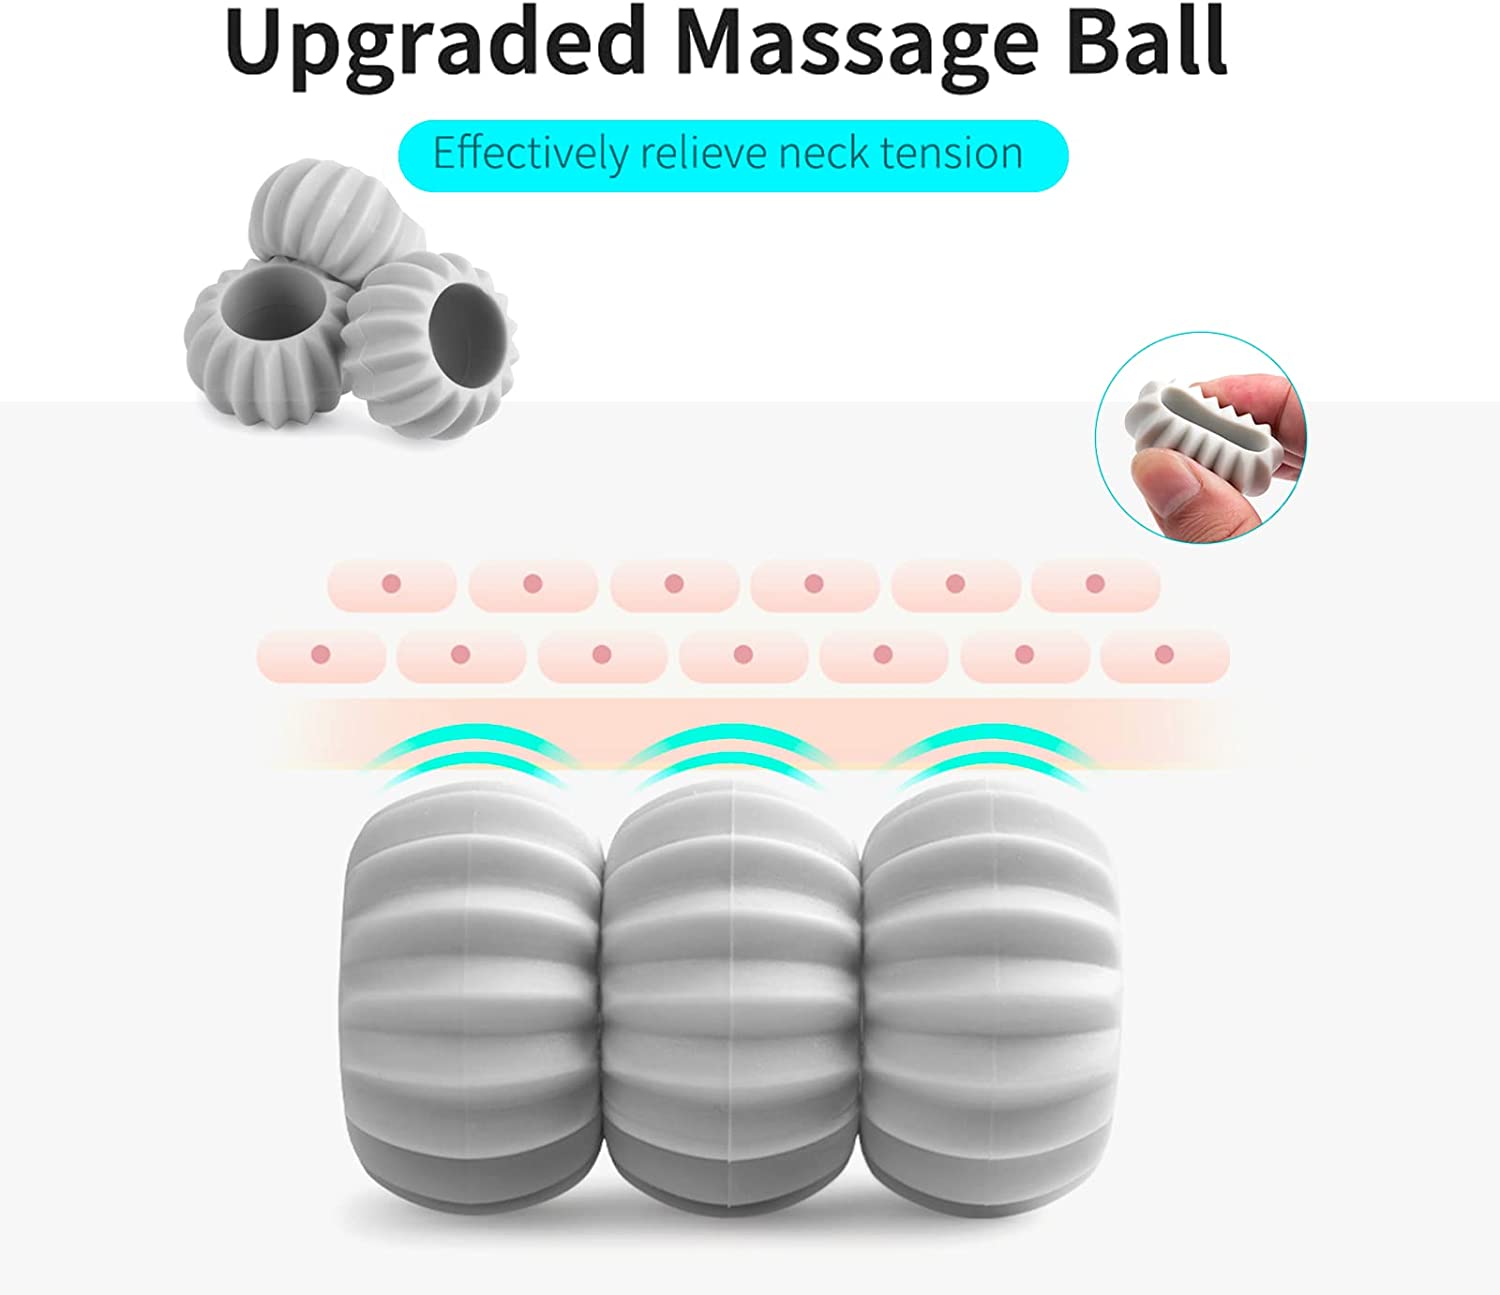 Neck Bud Massager Reviews: Does This Neck Massager Roller